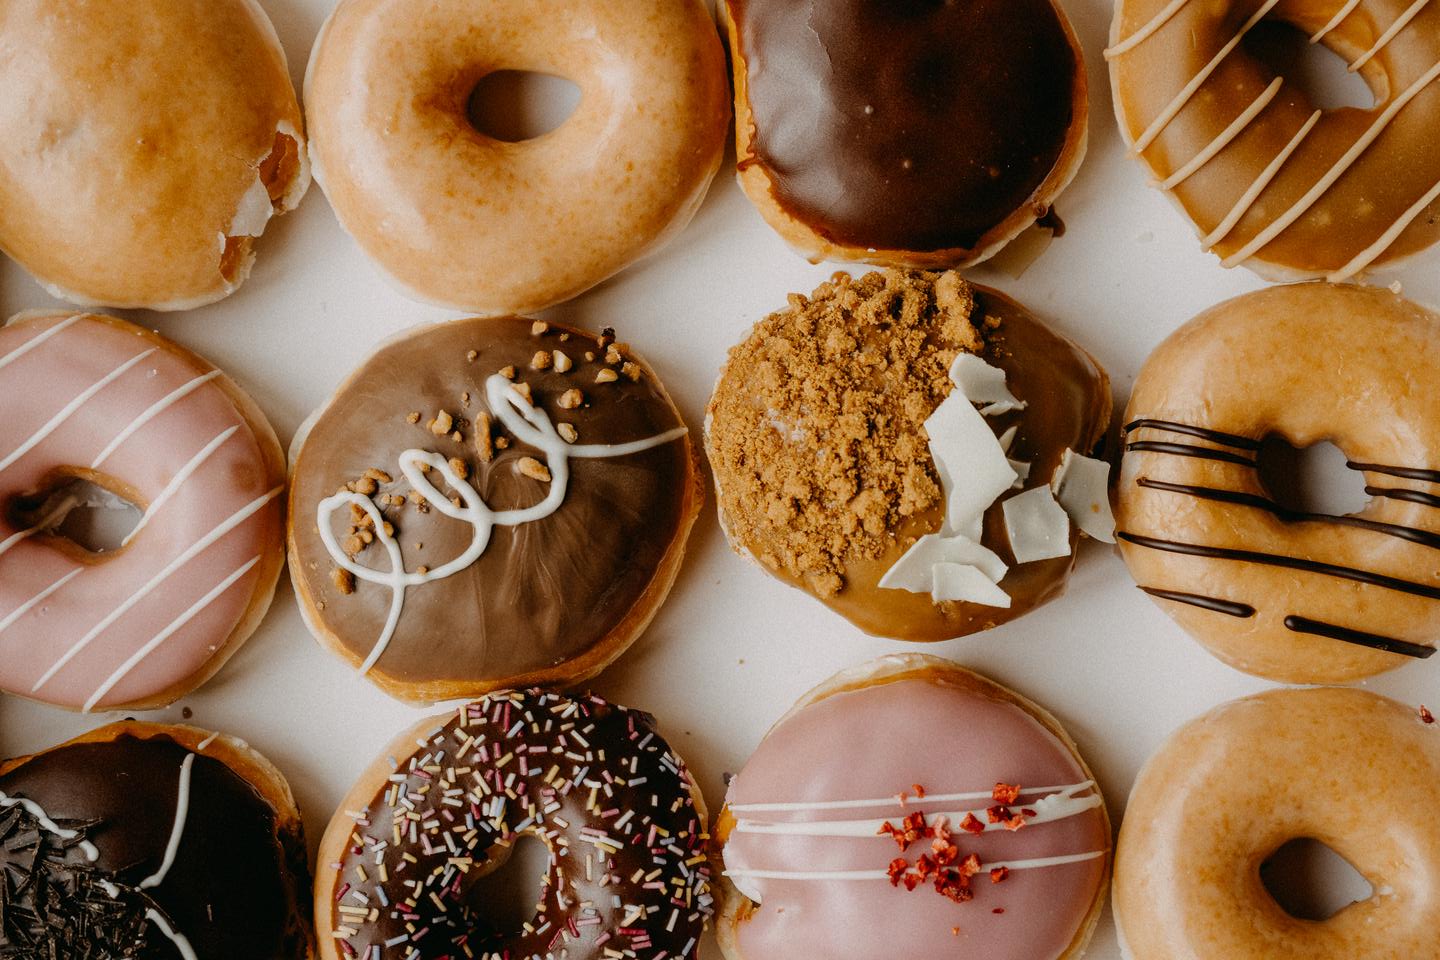 These Are the 32 Worst Foods in the Human Diet, According to AI – How Many Have You Eaten Recently? Dozen donuts doughnuts